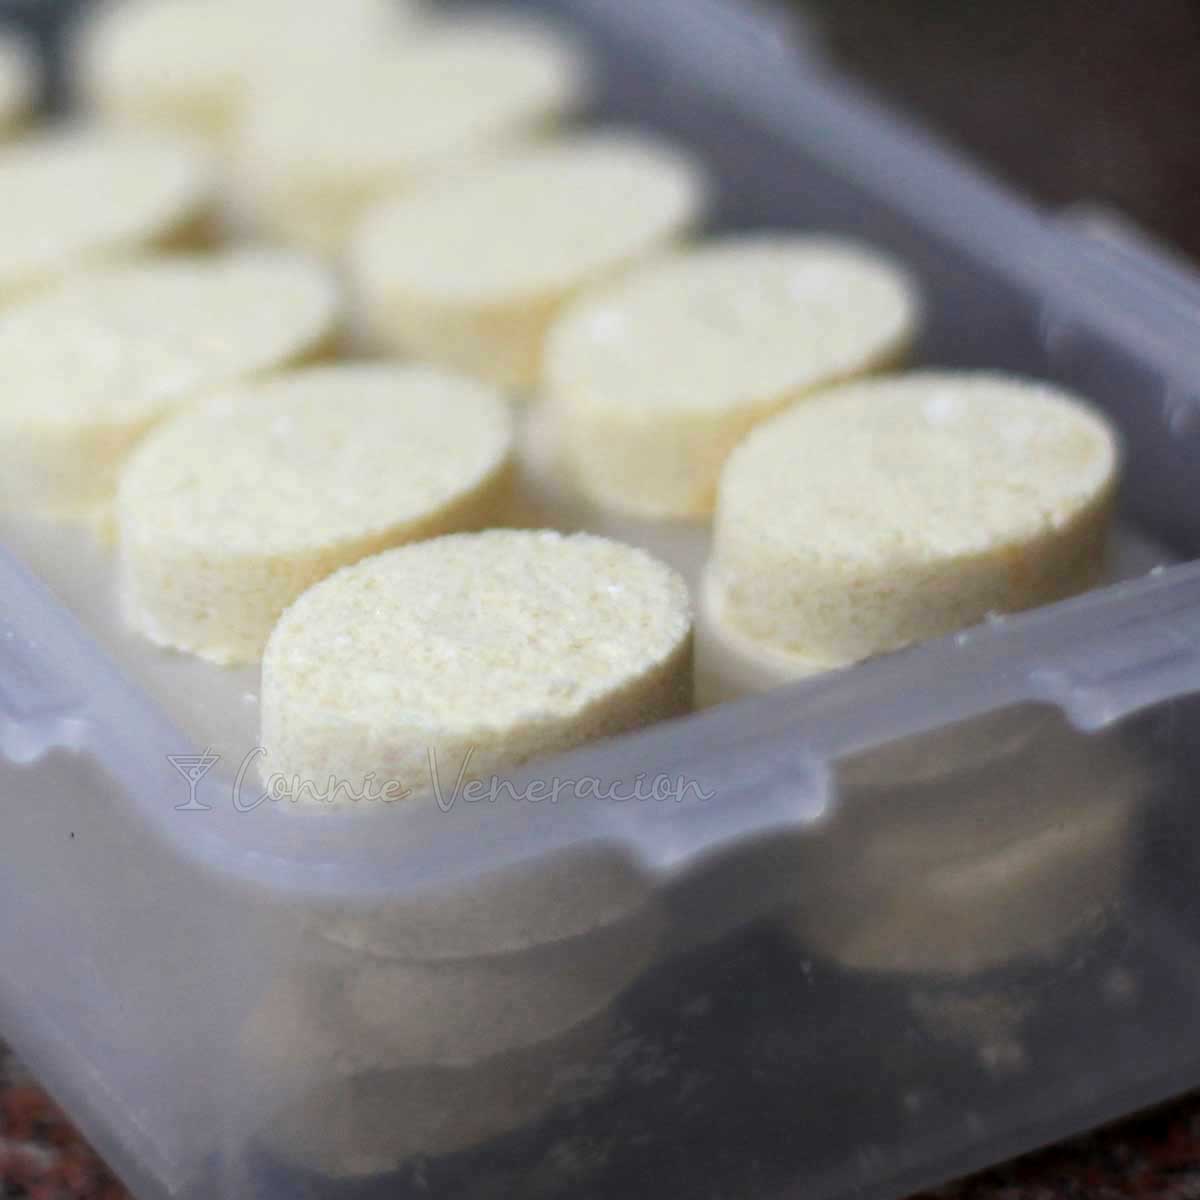 Stacks of polvoron in container